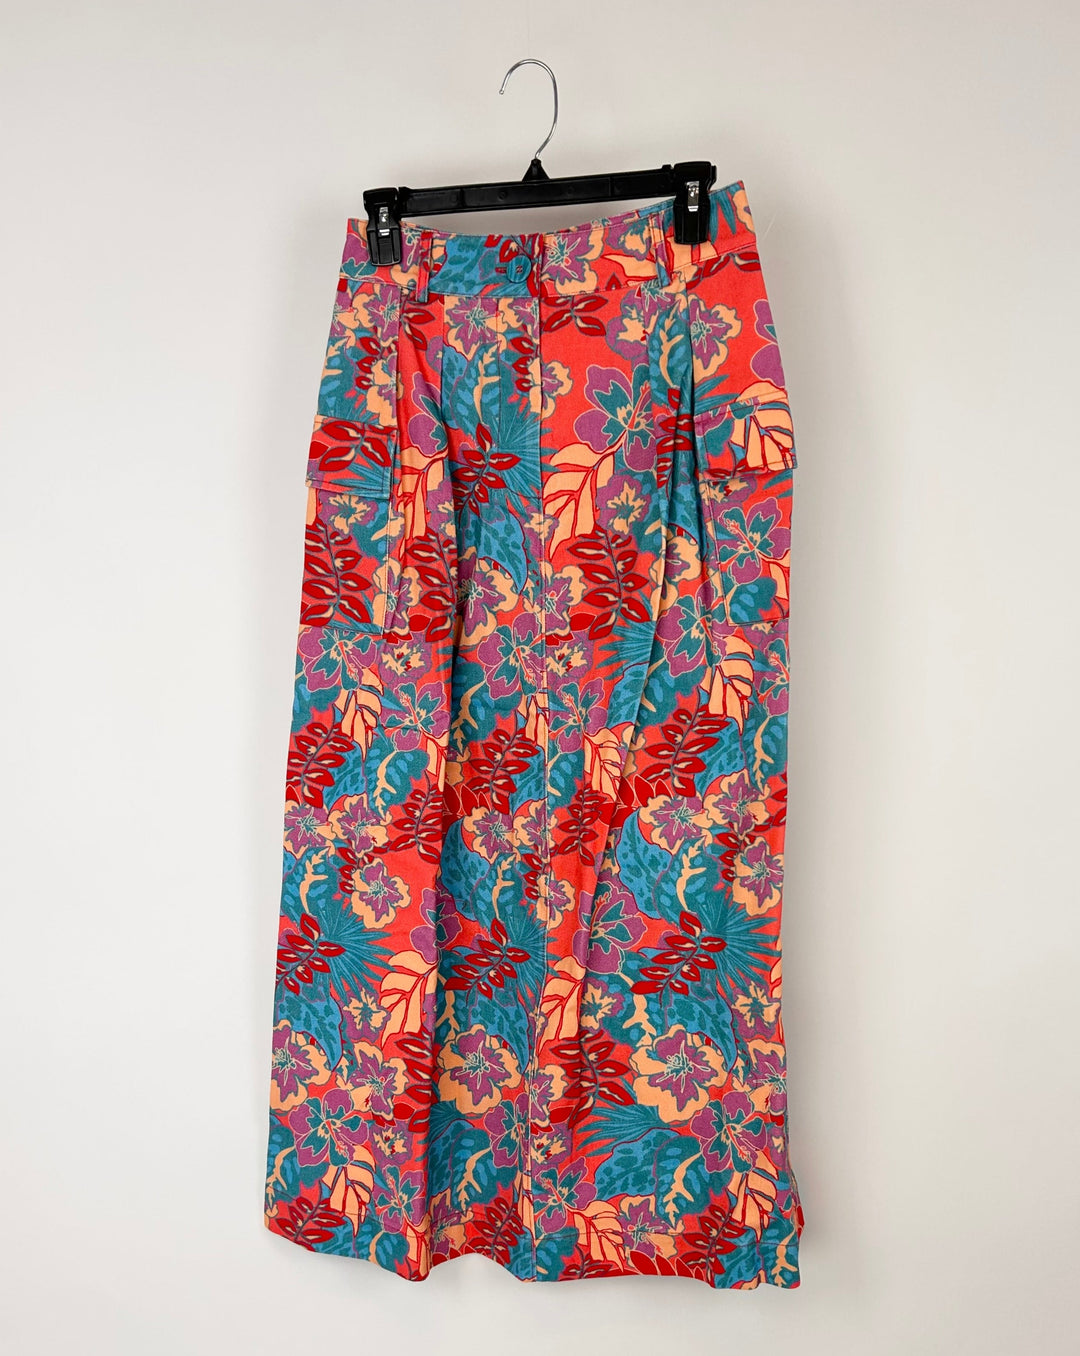 Abstract Floral Skirt - Small